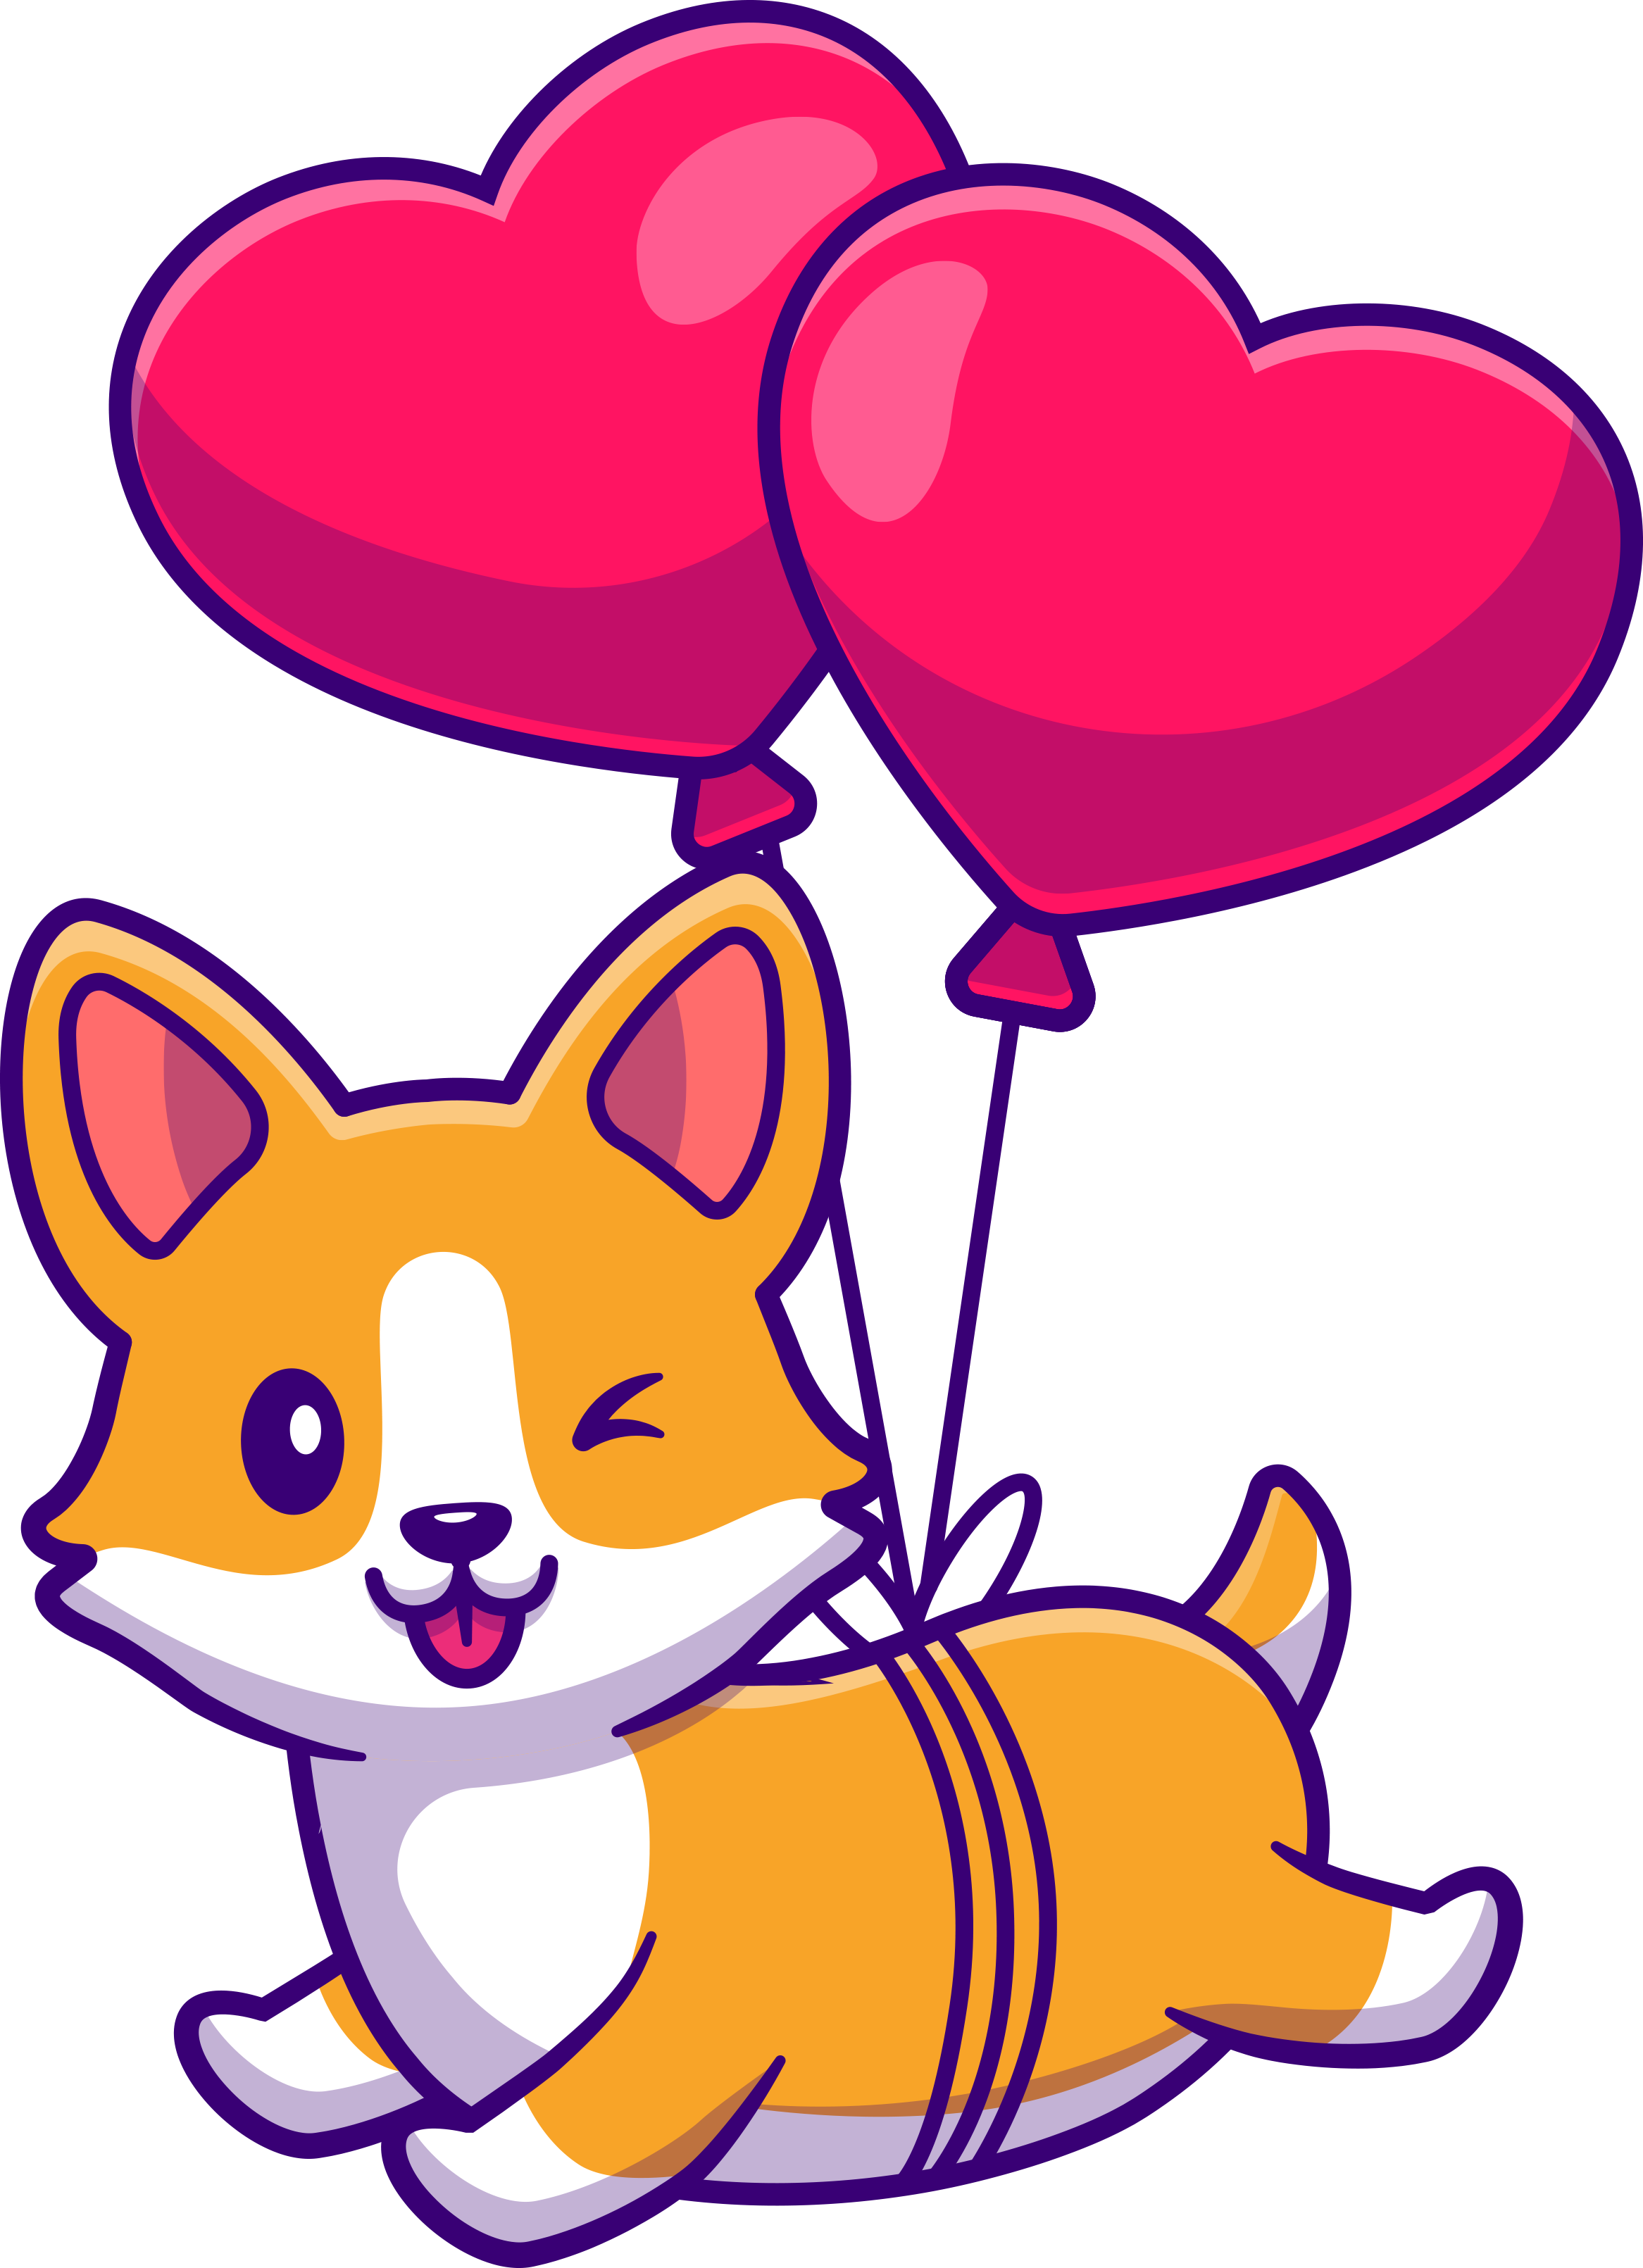 An illustration of a cute Corgi being uplifted by the power of two heart-shaped balloons.